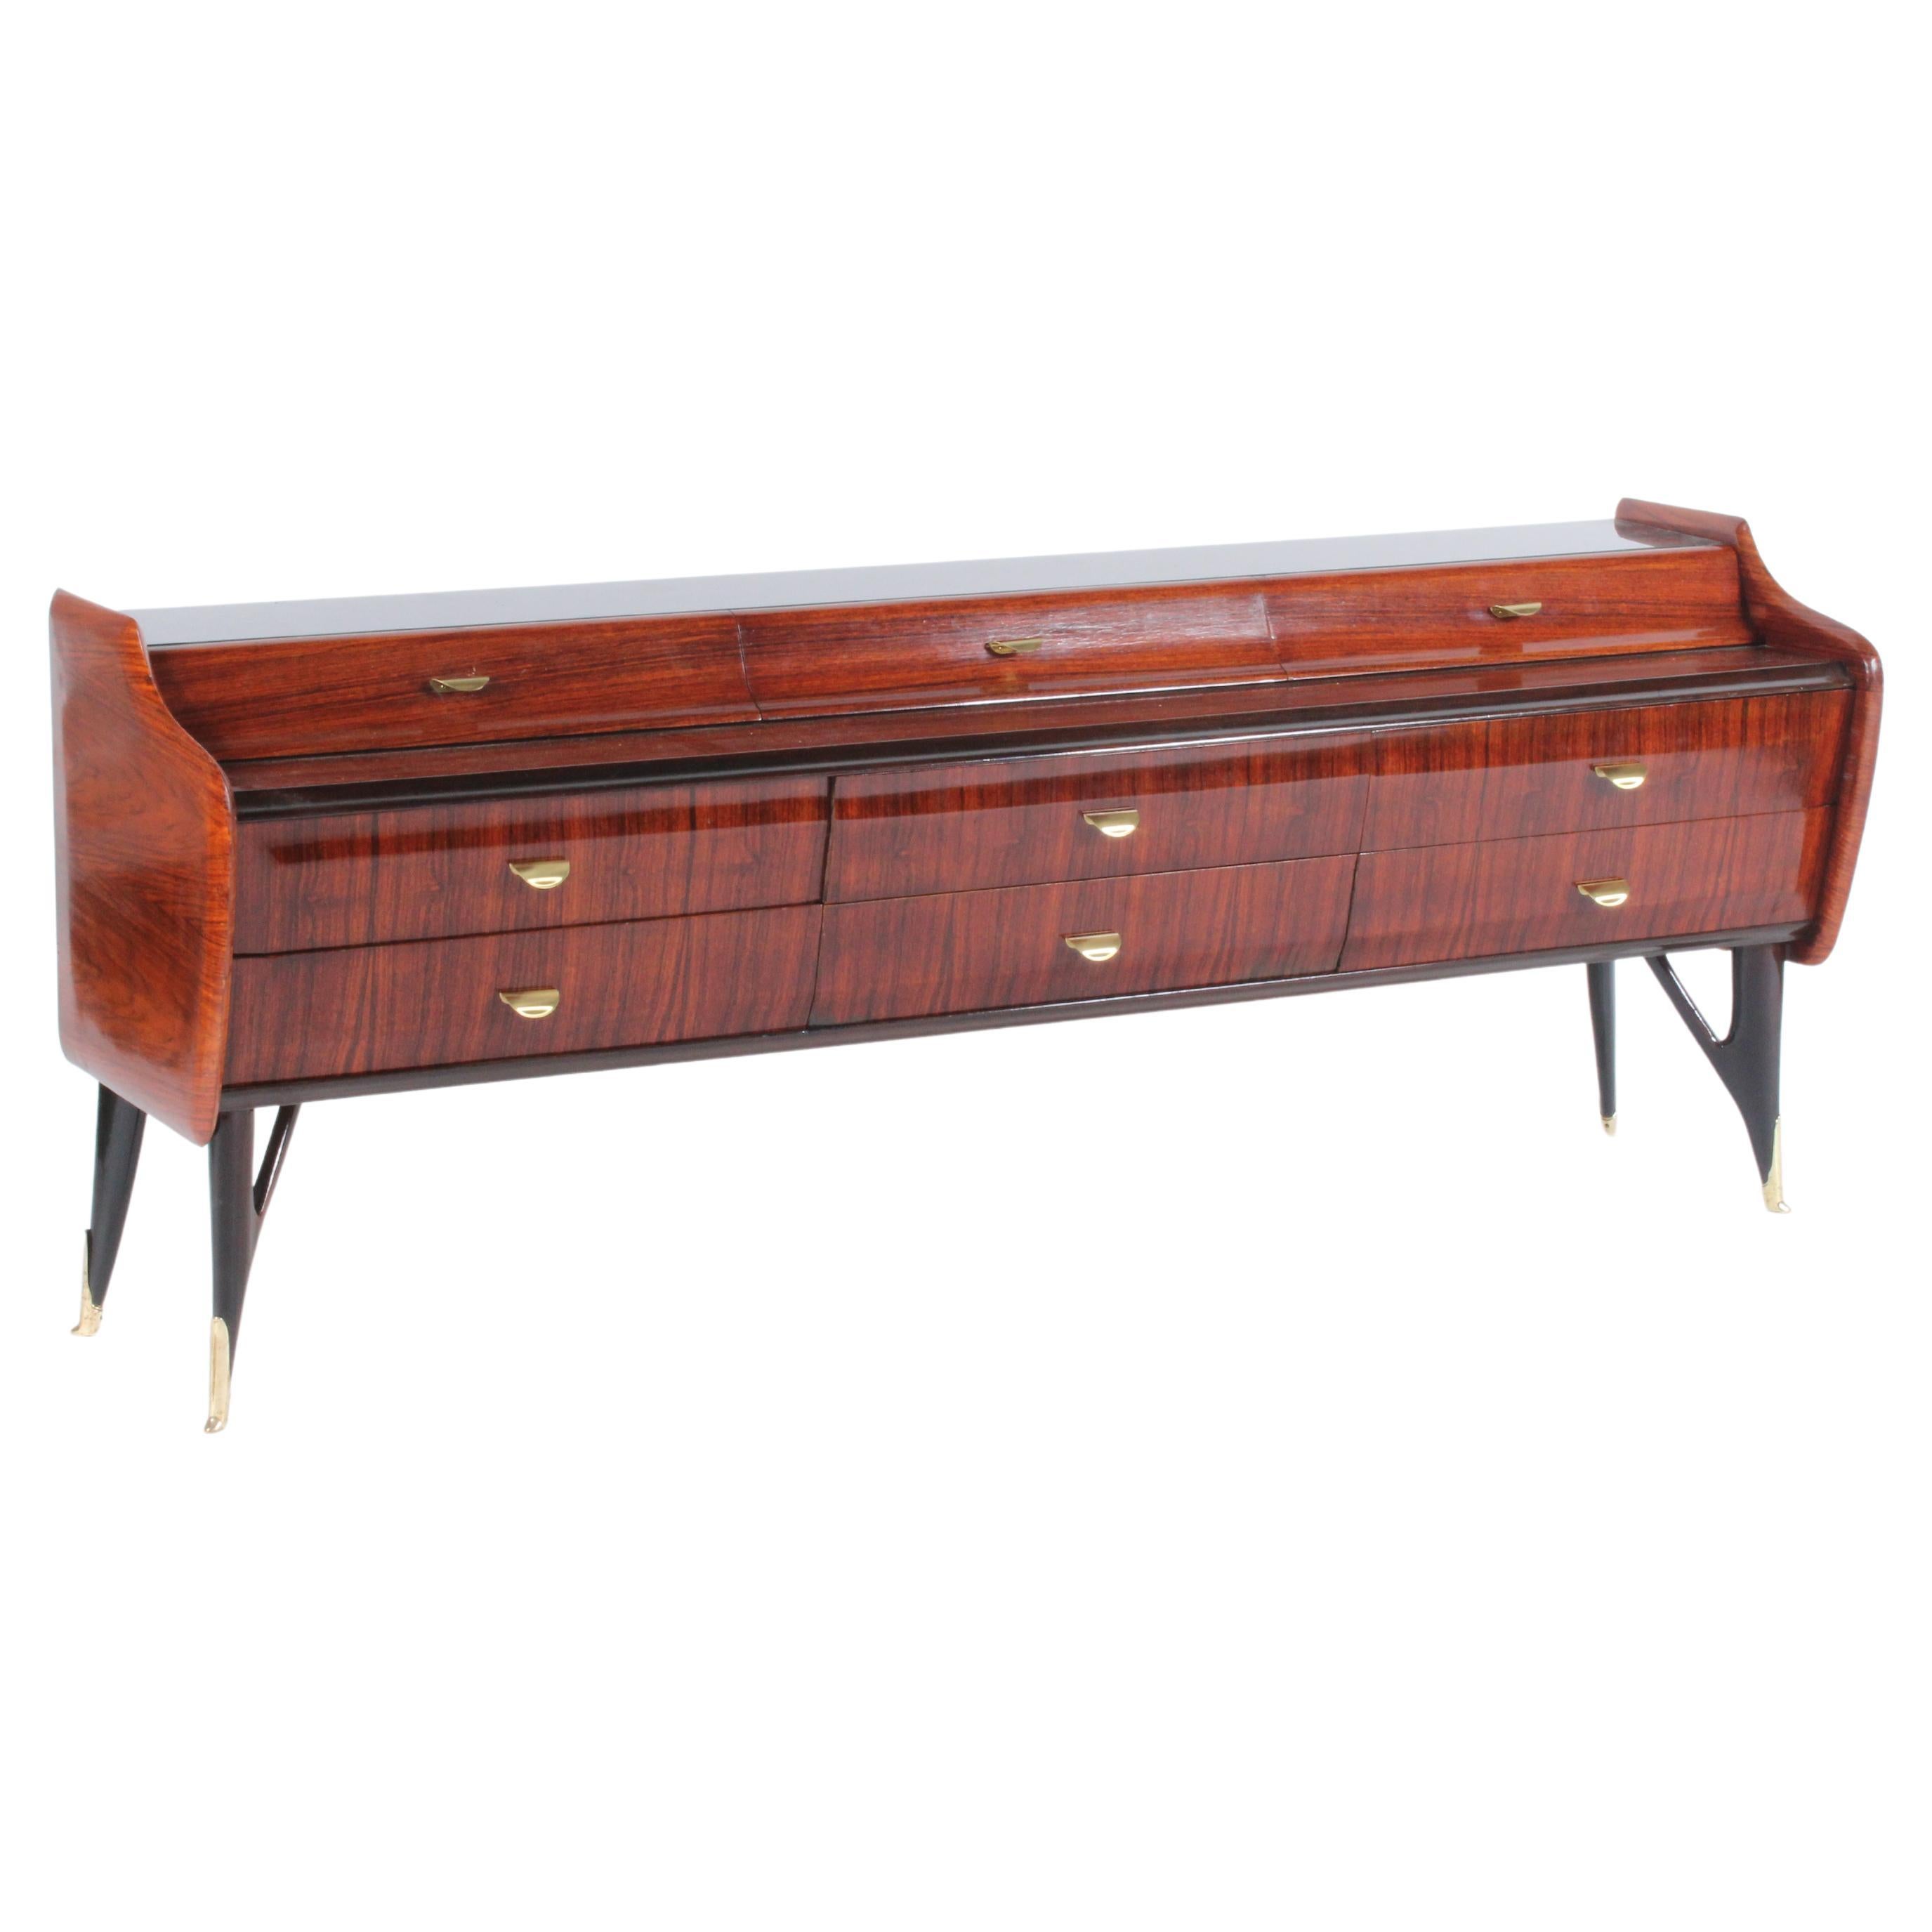 Super Stylish Midcentury Italian Sideboard in the Manner of Ico Parisi